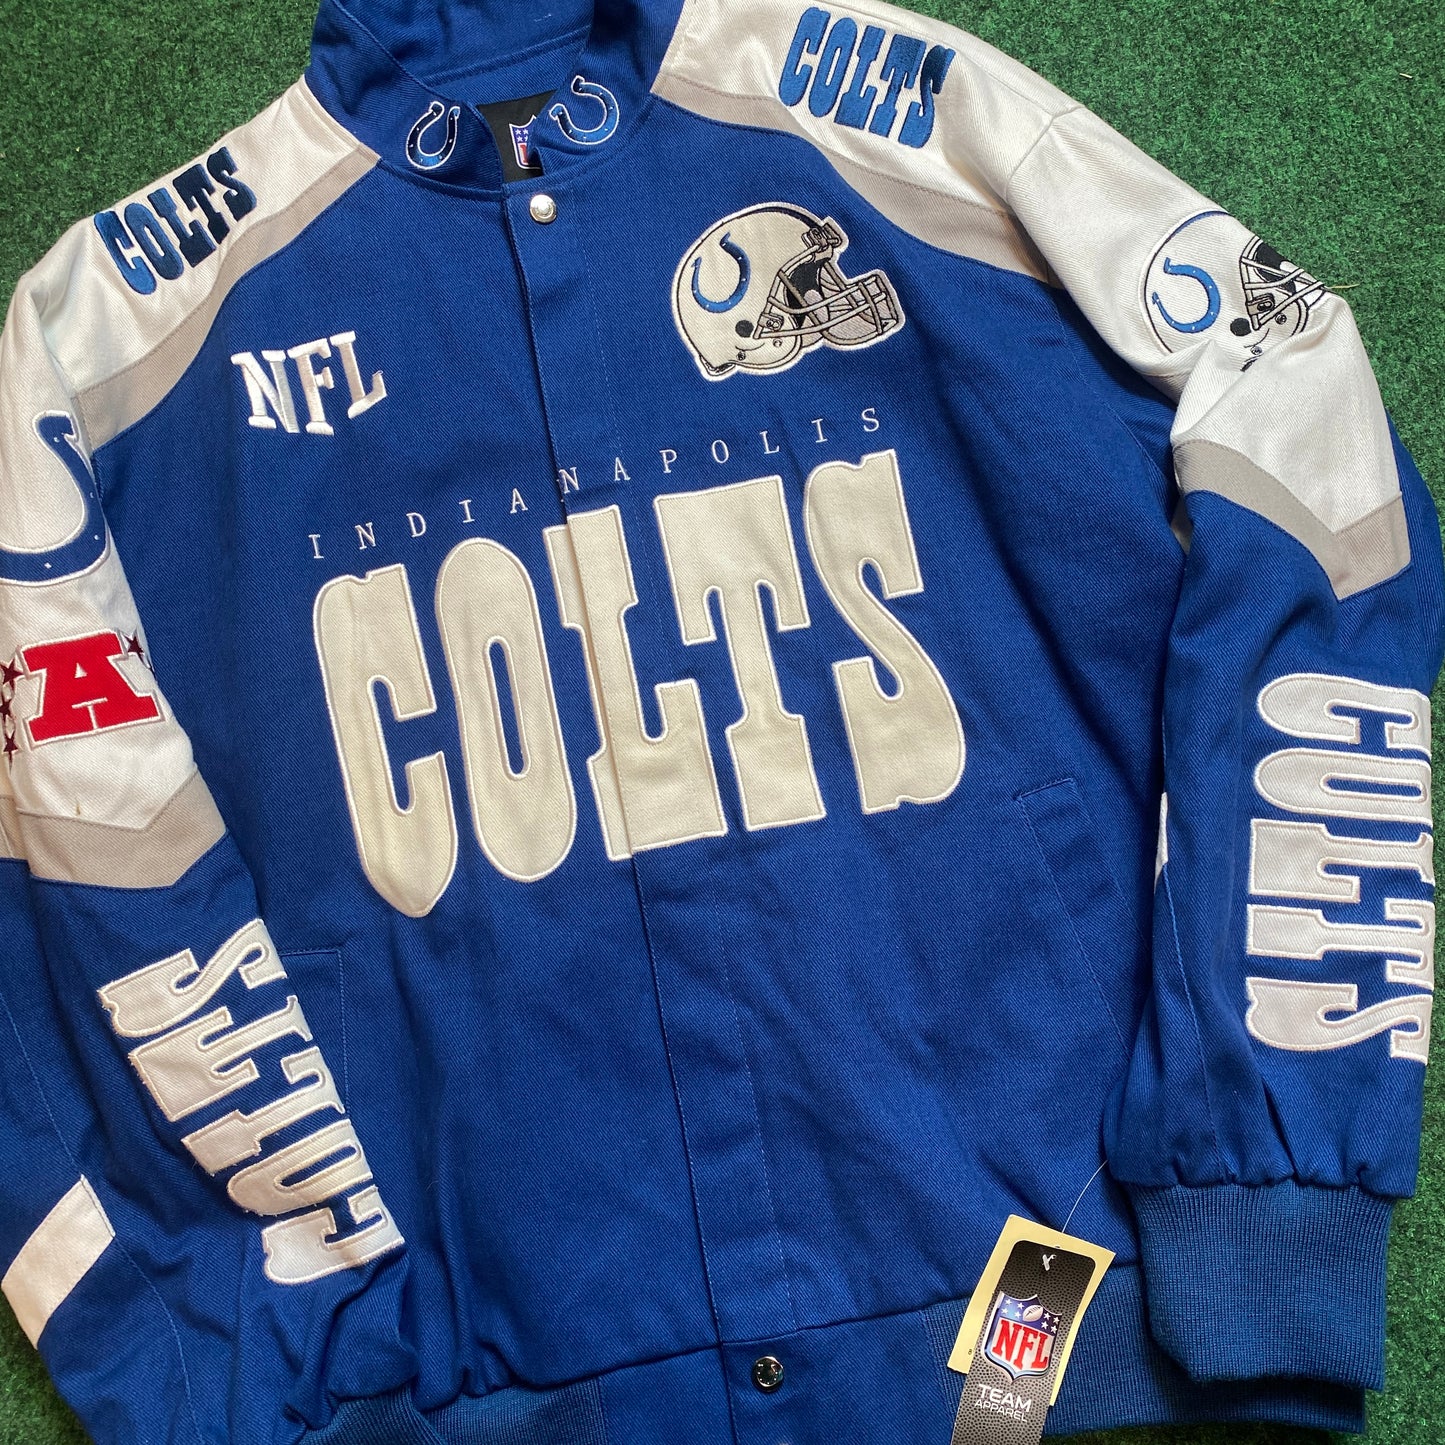 00s Indianapolis Colts Embroidered Deadstock NFL Jacket (XL)